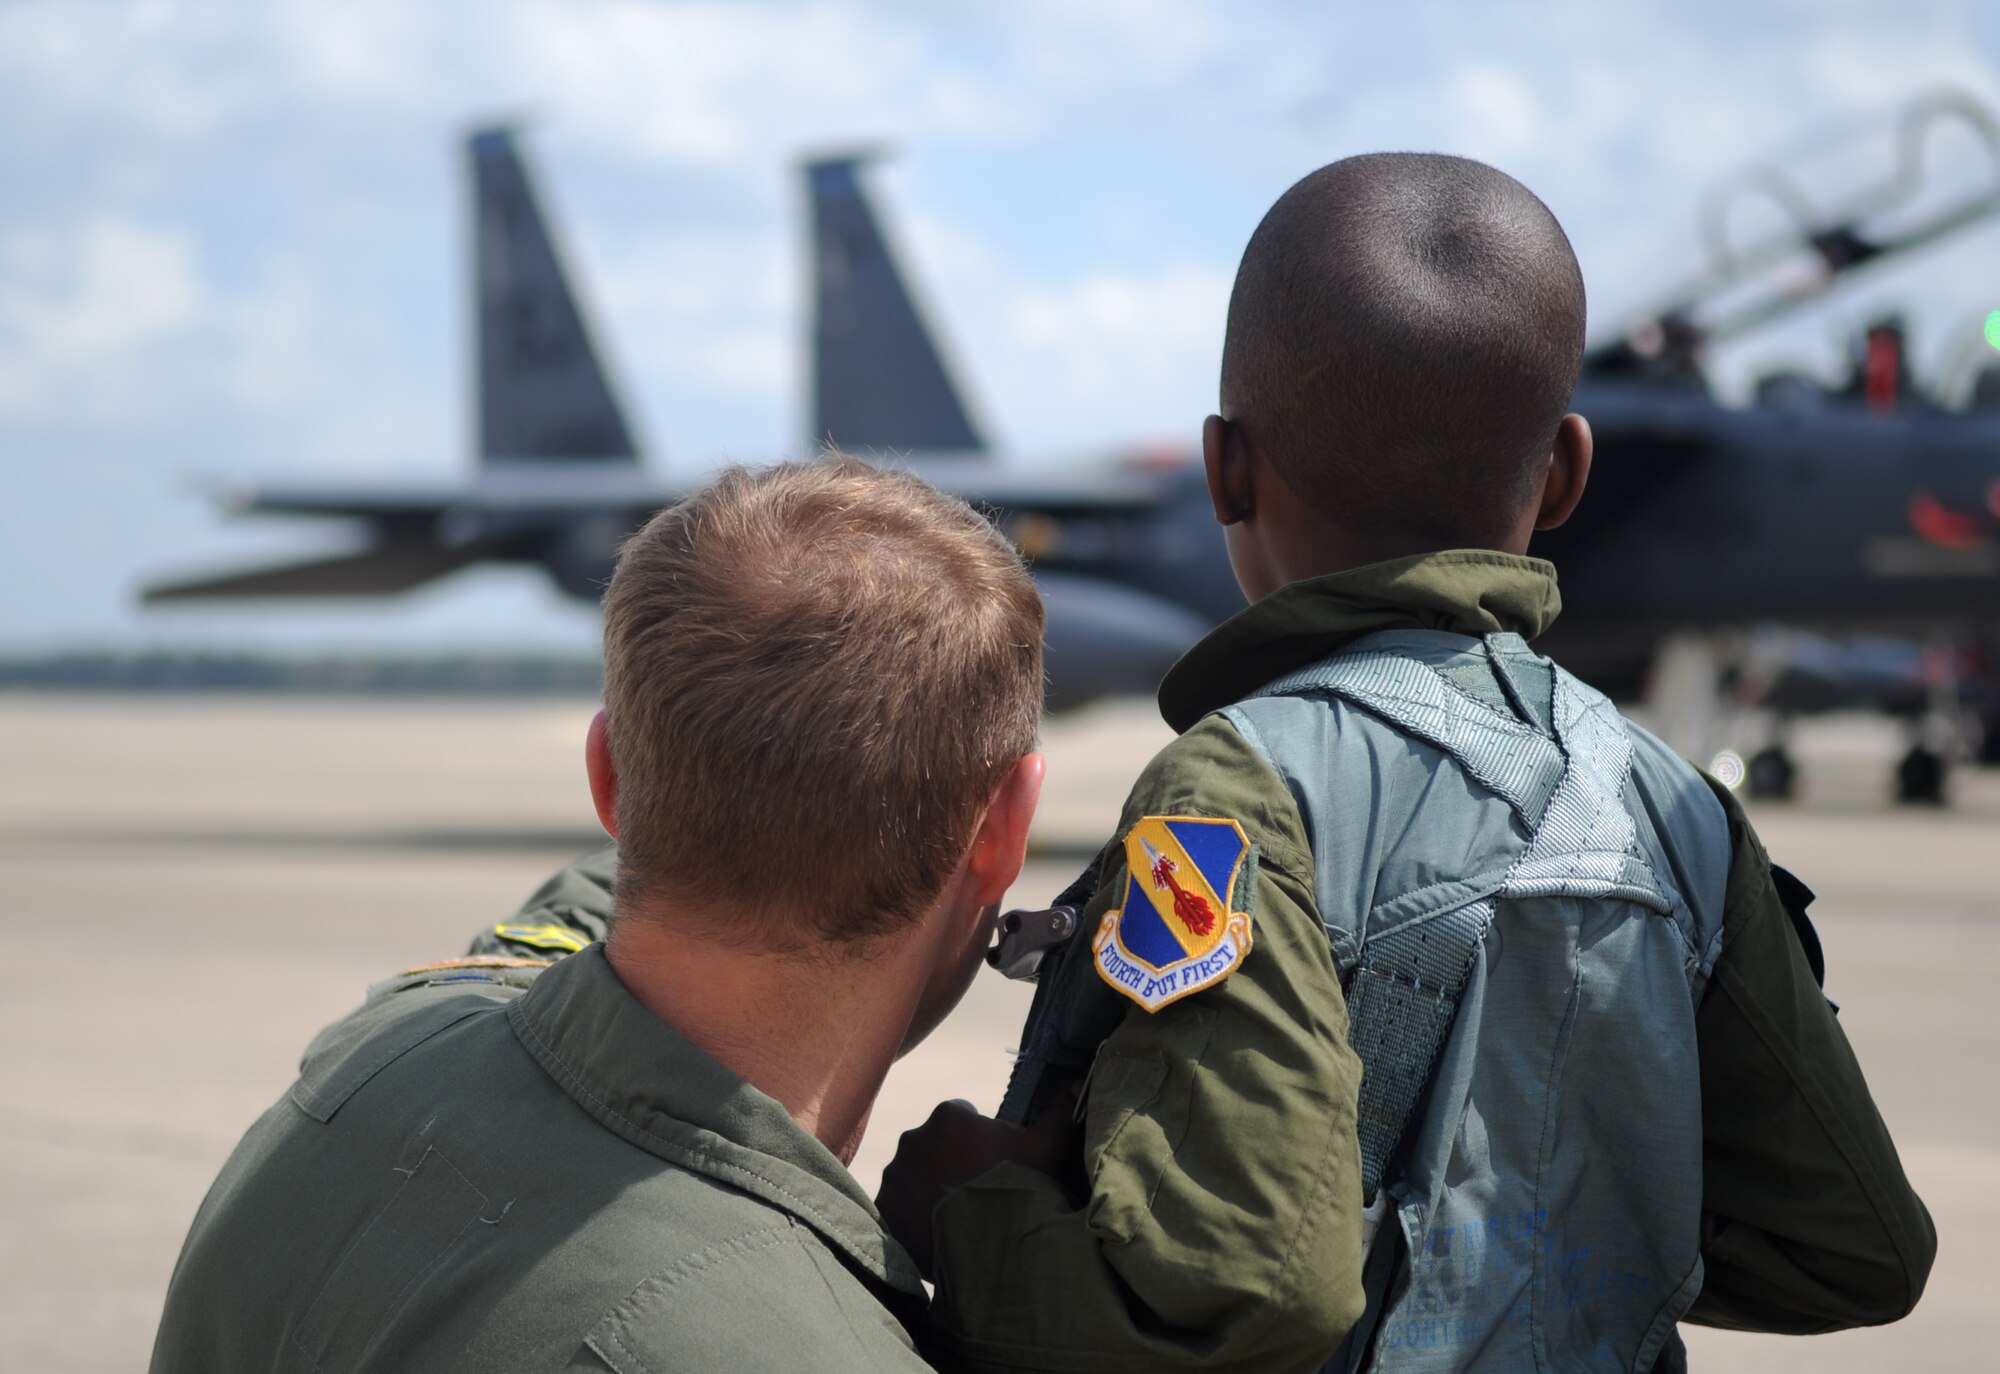 Capt. Adam Luber, 334th Fighter Squadron pilot, and Jeremiah Seaberry, 334th FS pilot for a day, watch F-15E Strike Eagles on the flightline during a 4th Fighter Wing Pilot for a Day event, April 3, 2015, at Seymour Johnson Air Force Base, North Carolina. Jeremiah described Luber as “awesome.” (U.S. Air Force photo/Senior Airman Ashley J. Thum)